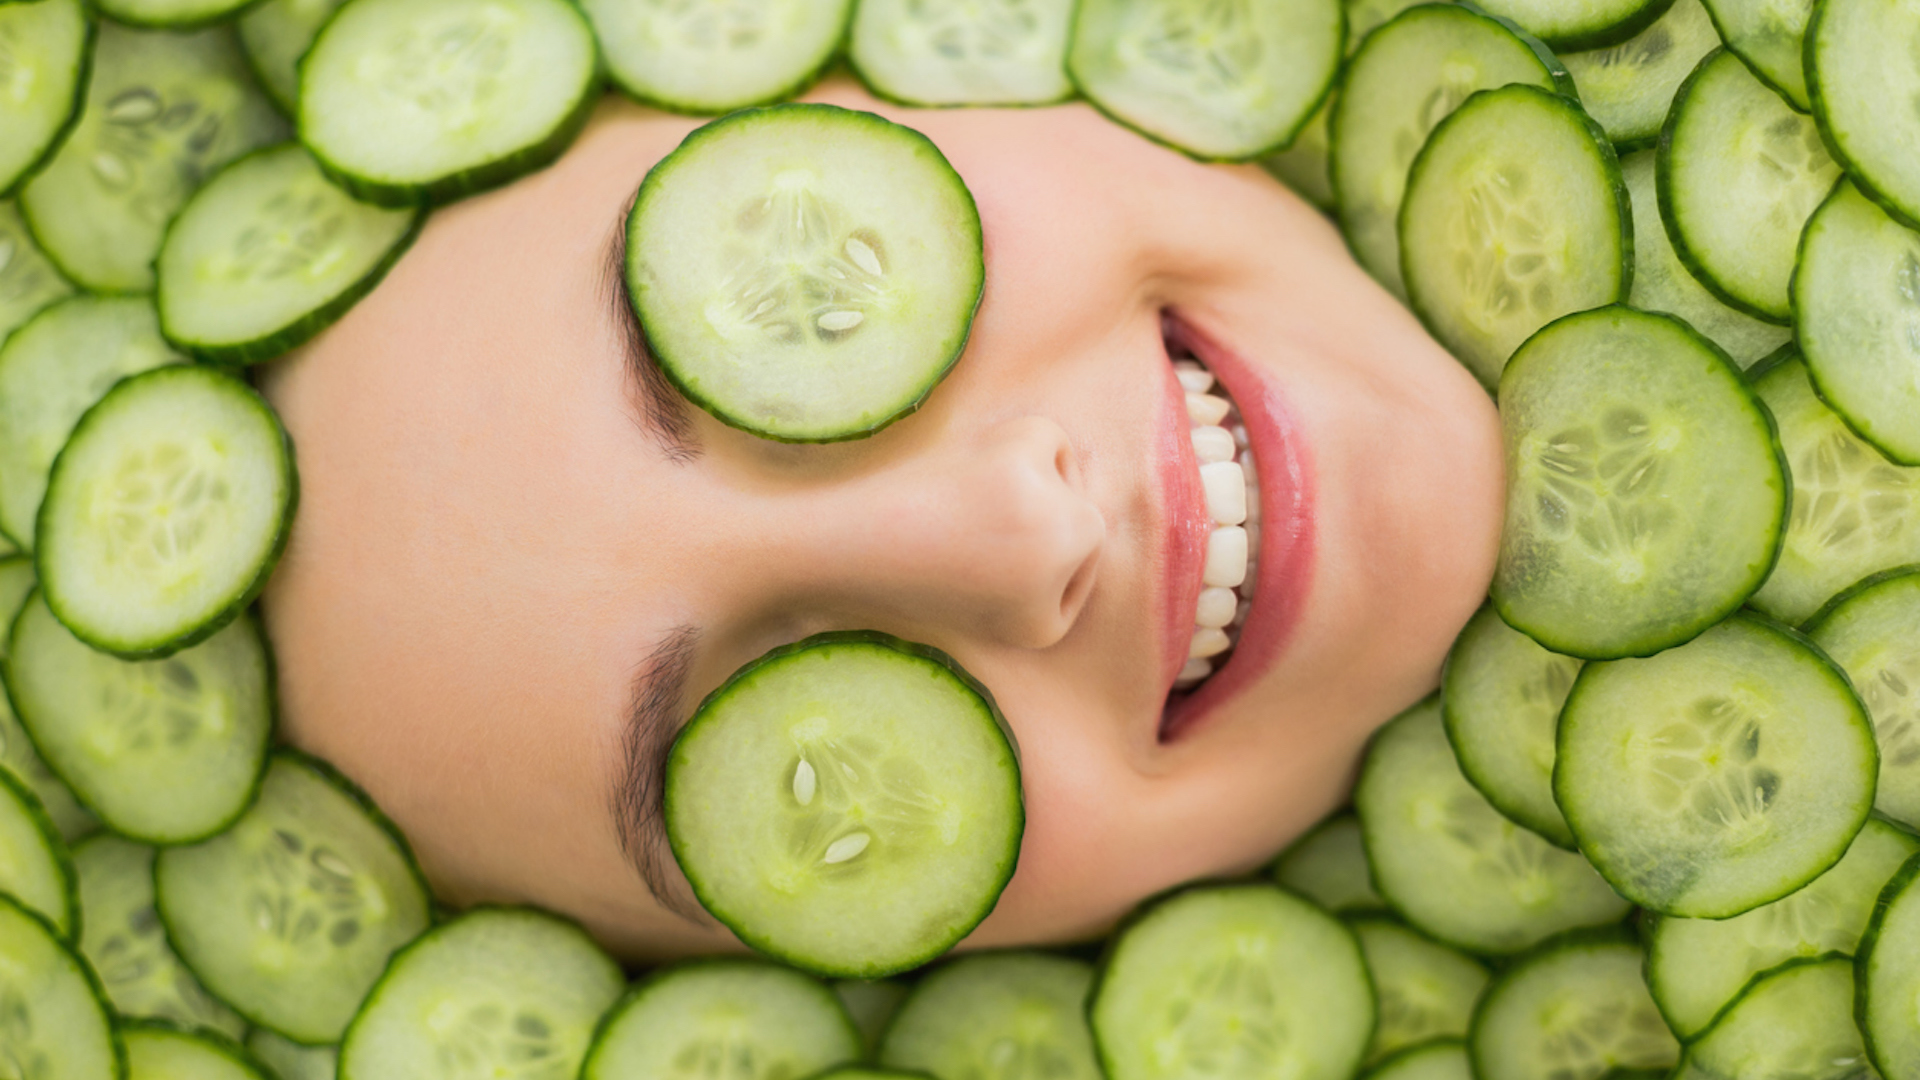 A woman relaxing with slices of cucumber over her eyes